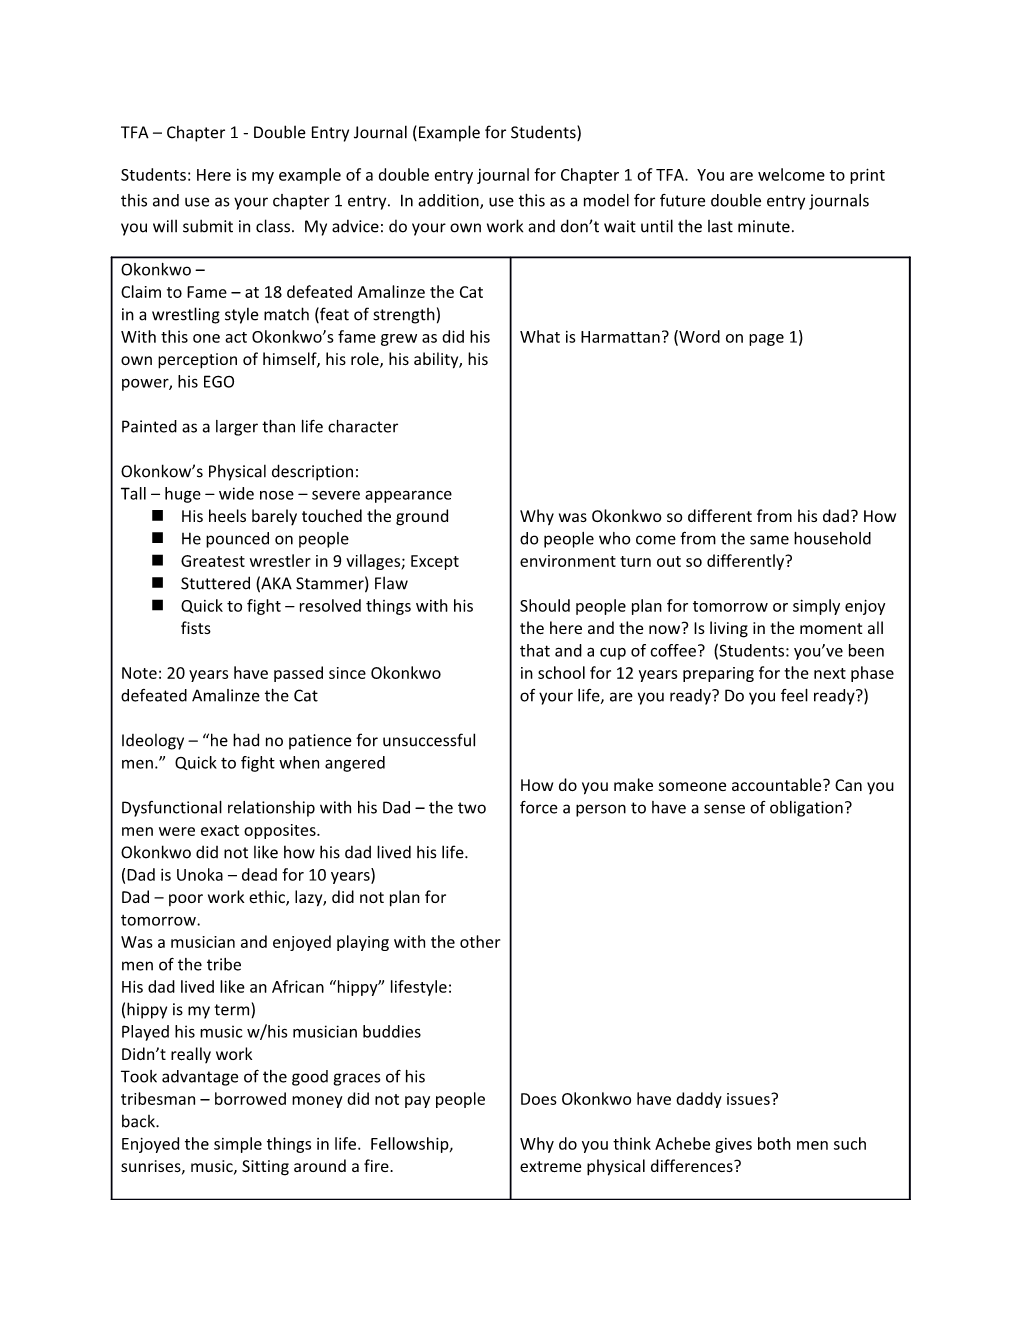 TFA Chapter 1 - Double Entry Journal (Example for Students)